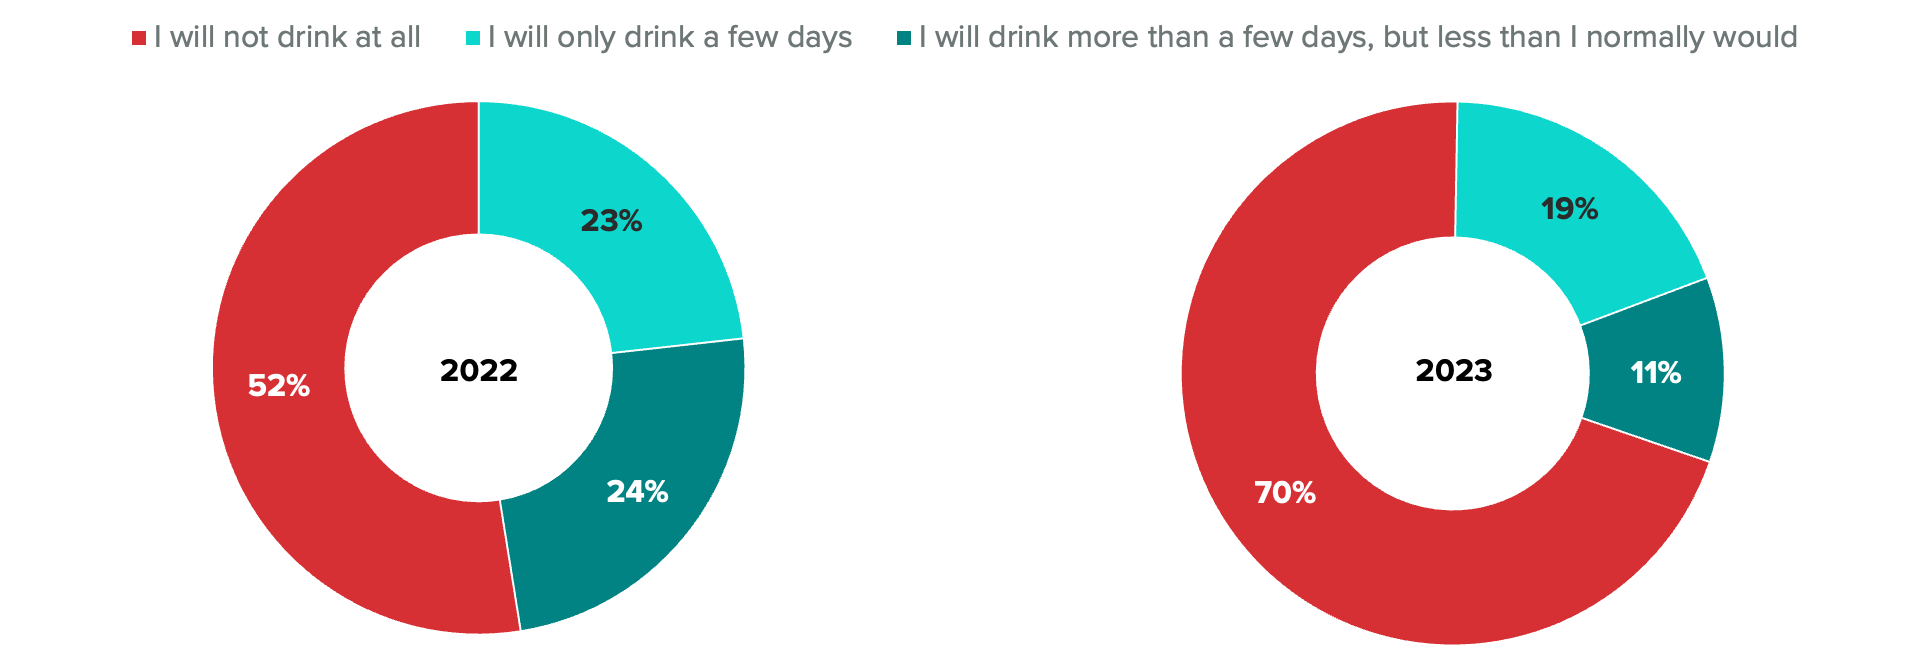 Pie chart of consumer participation in Dry January showing more participants are planning to avoid drinking alcohol altogether than in 2022.